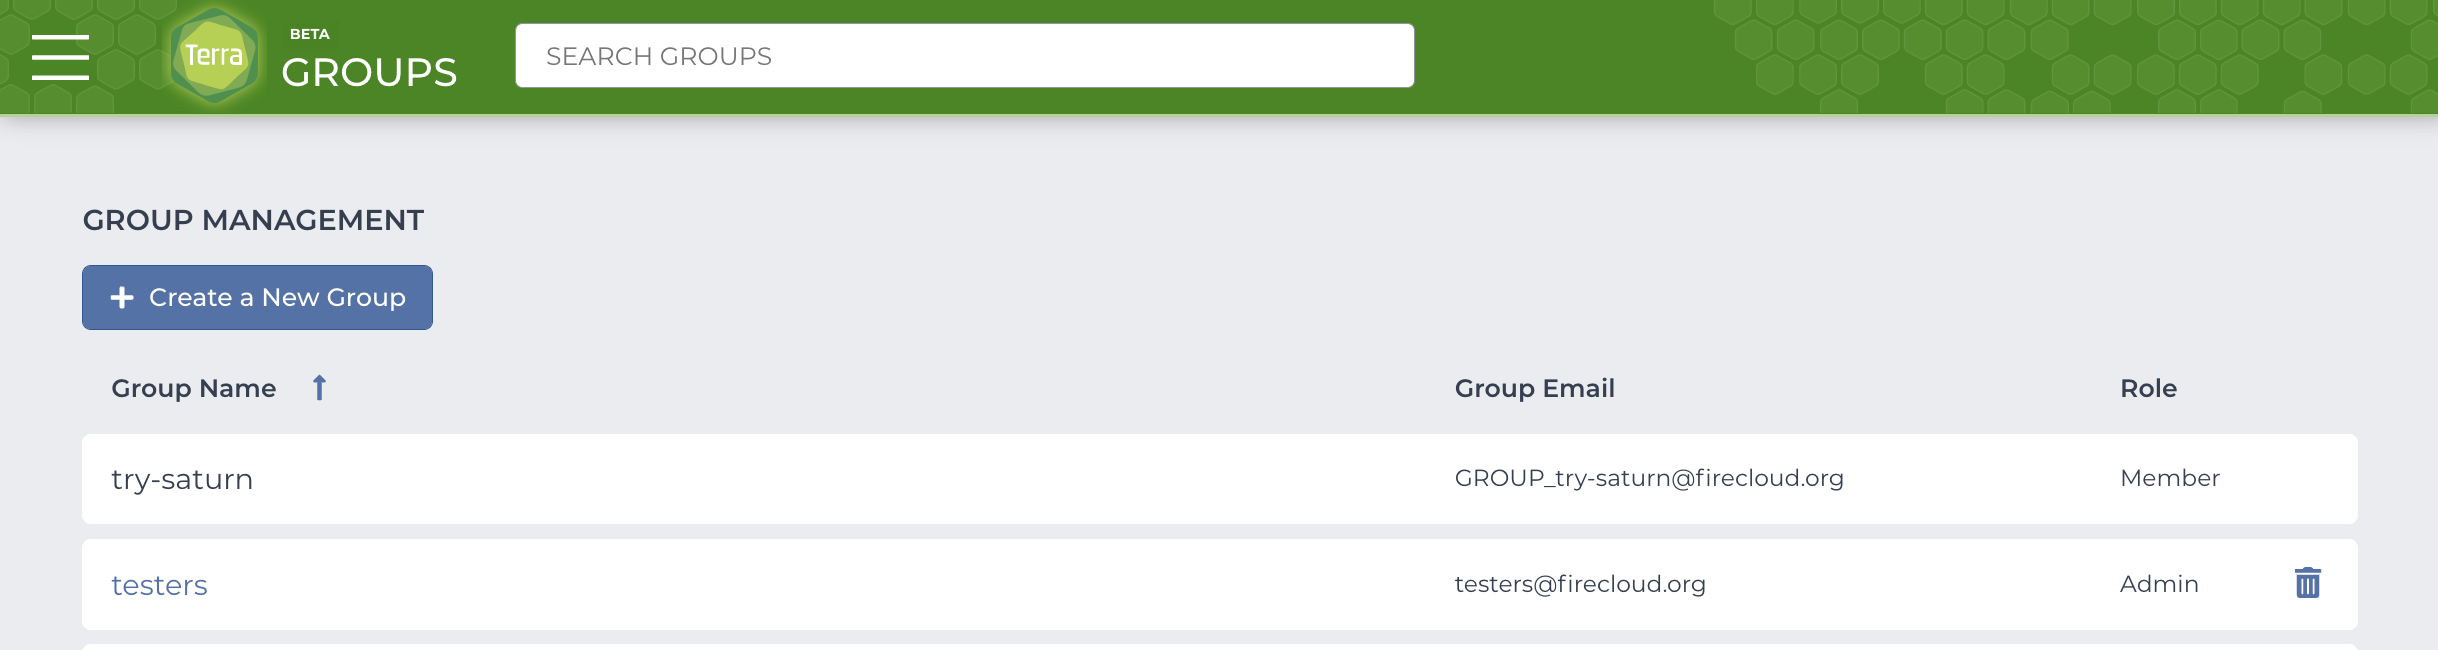 Screenshot of Groups page